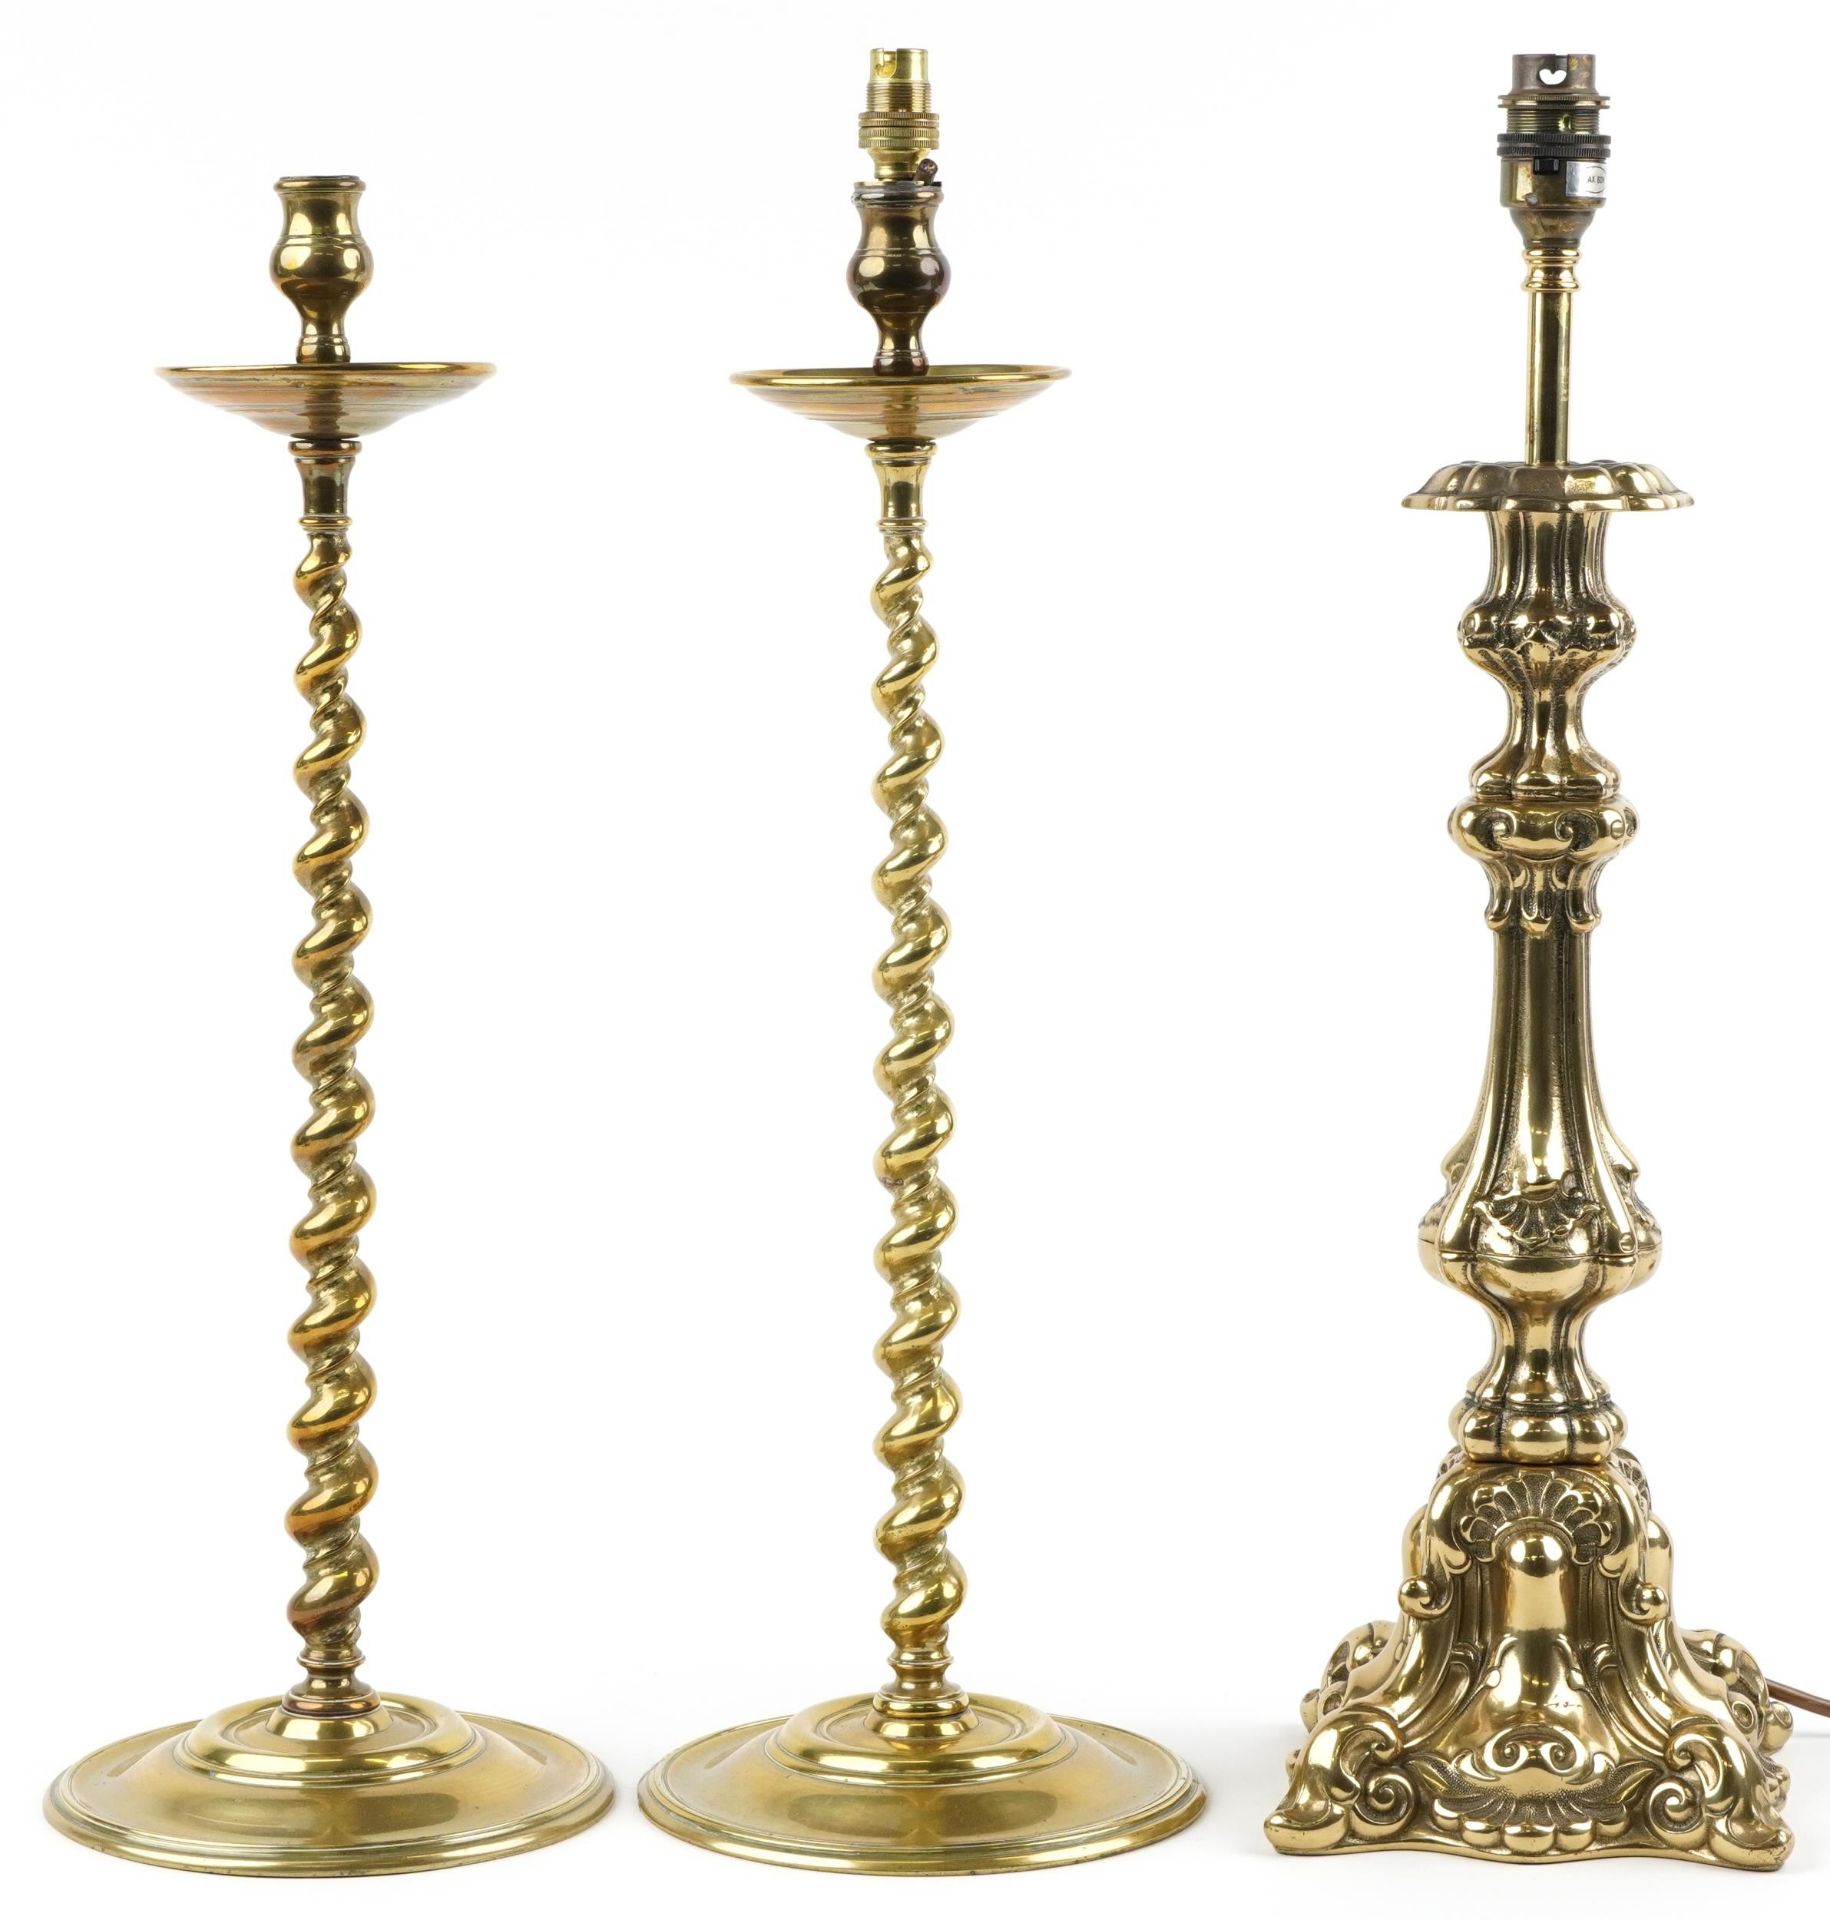 Pair of 19th century turned brass barley twist candlesticks and a classical brass table lamp, 51cm